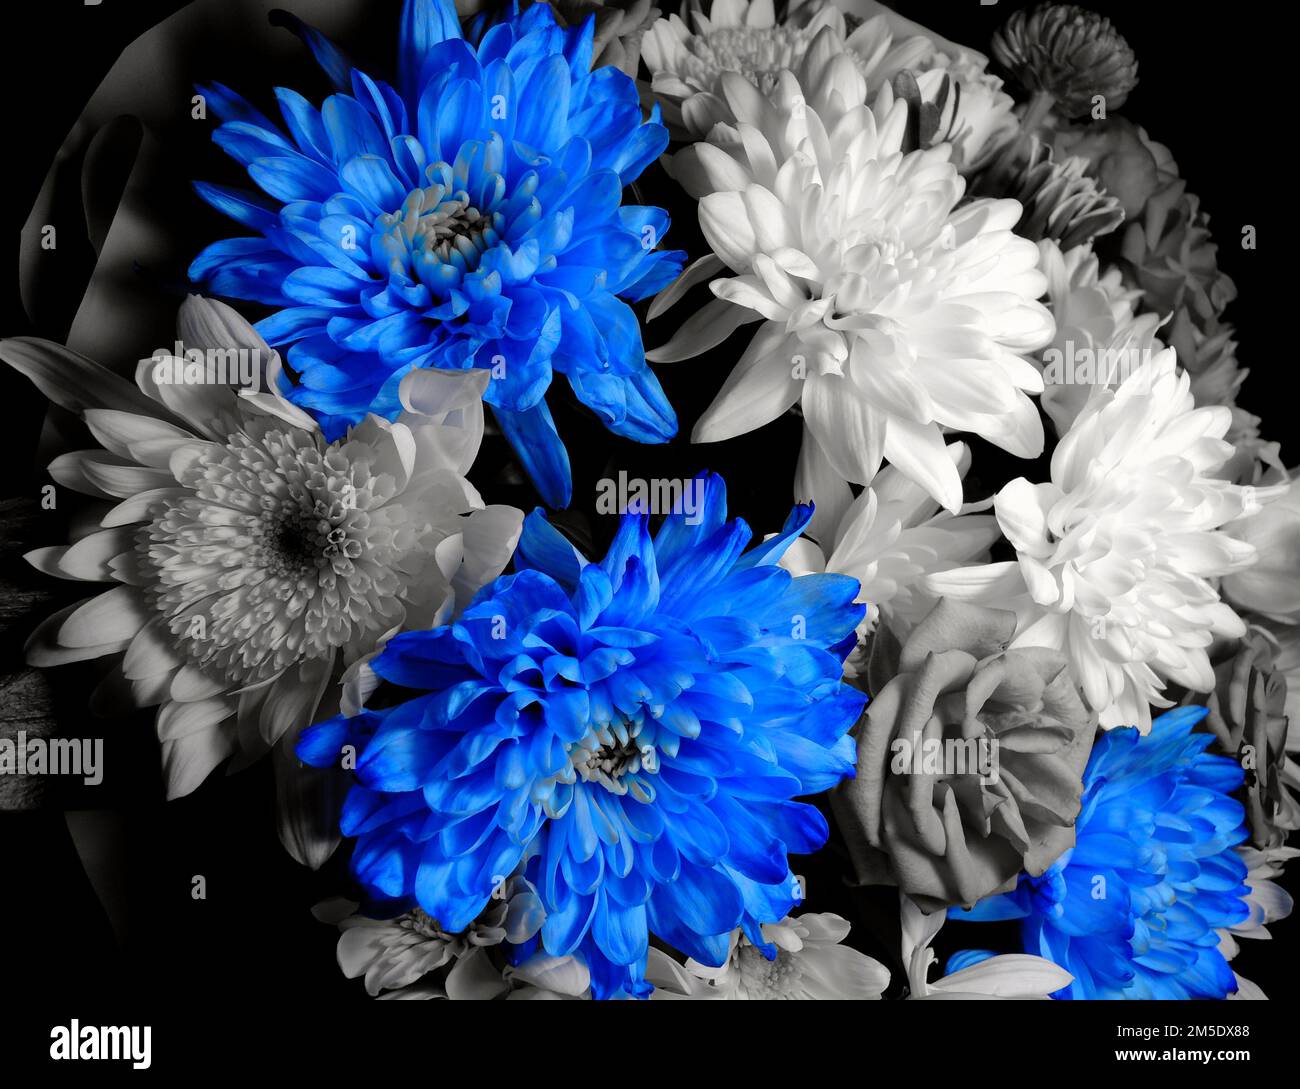 Blue Flowers In Black And White Flowers Beauty Stock Background Stock Photo